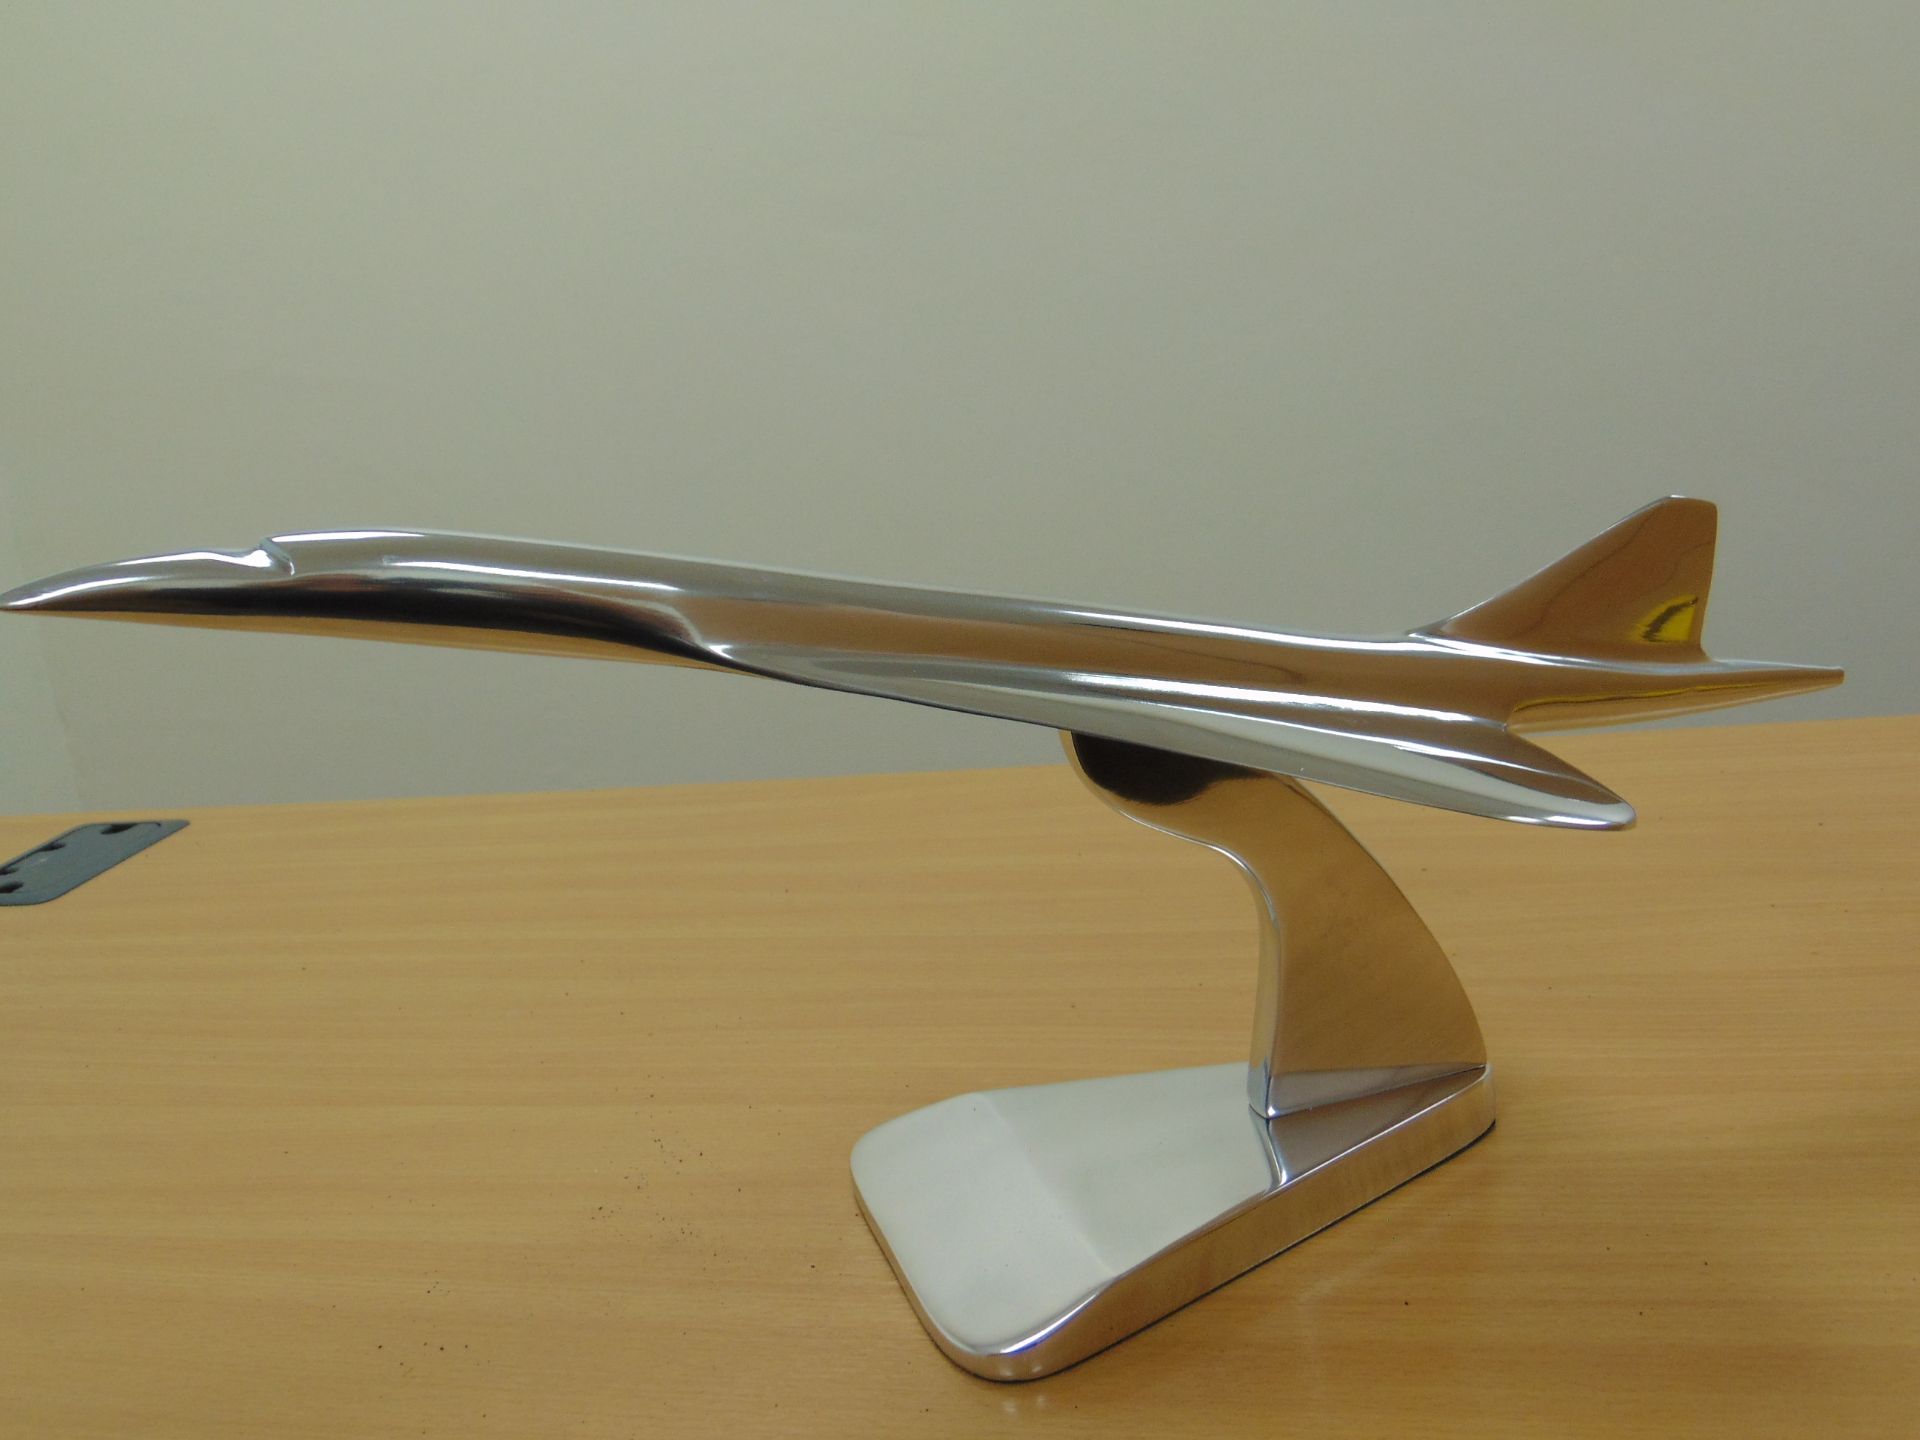 STUNNING POLISHED ALLUMINUM DESK TOP MODEL OF A CONCORD IN FLIGHT ON STAND - Image 7 of 12